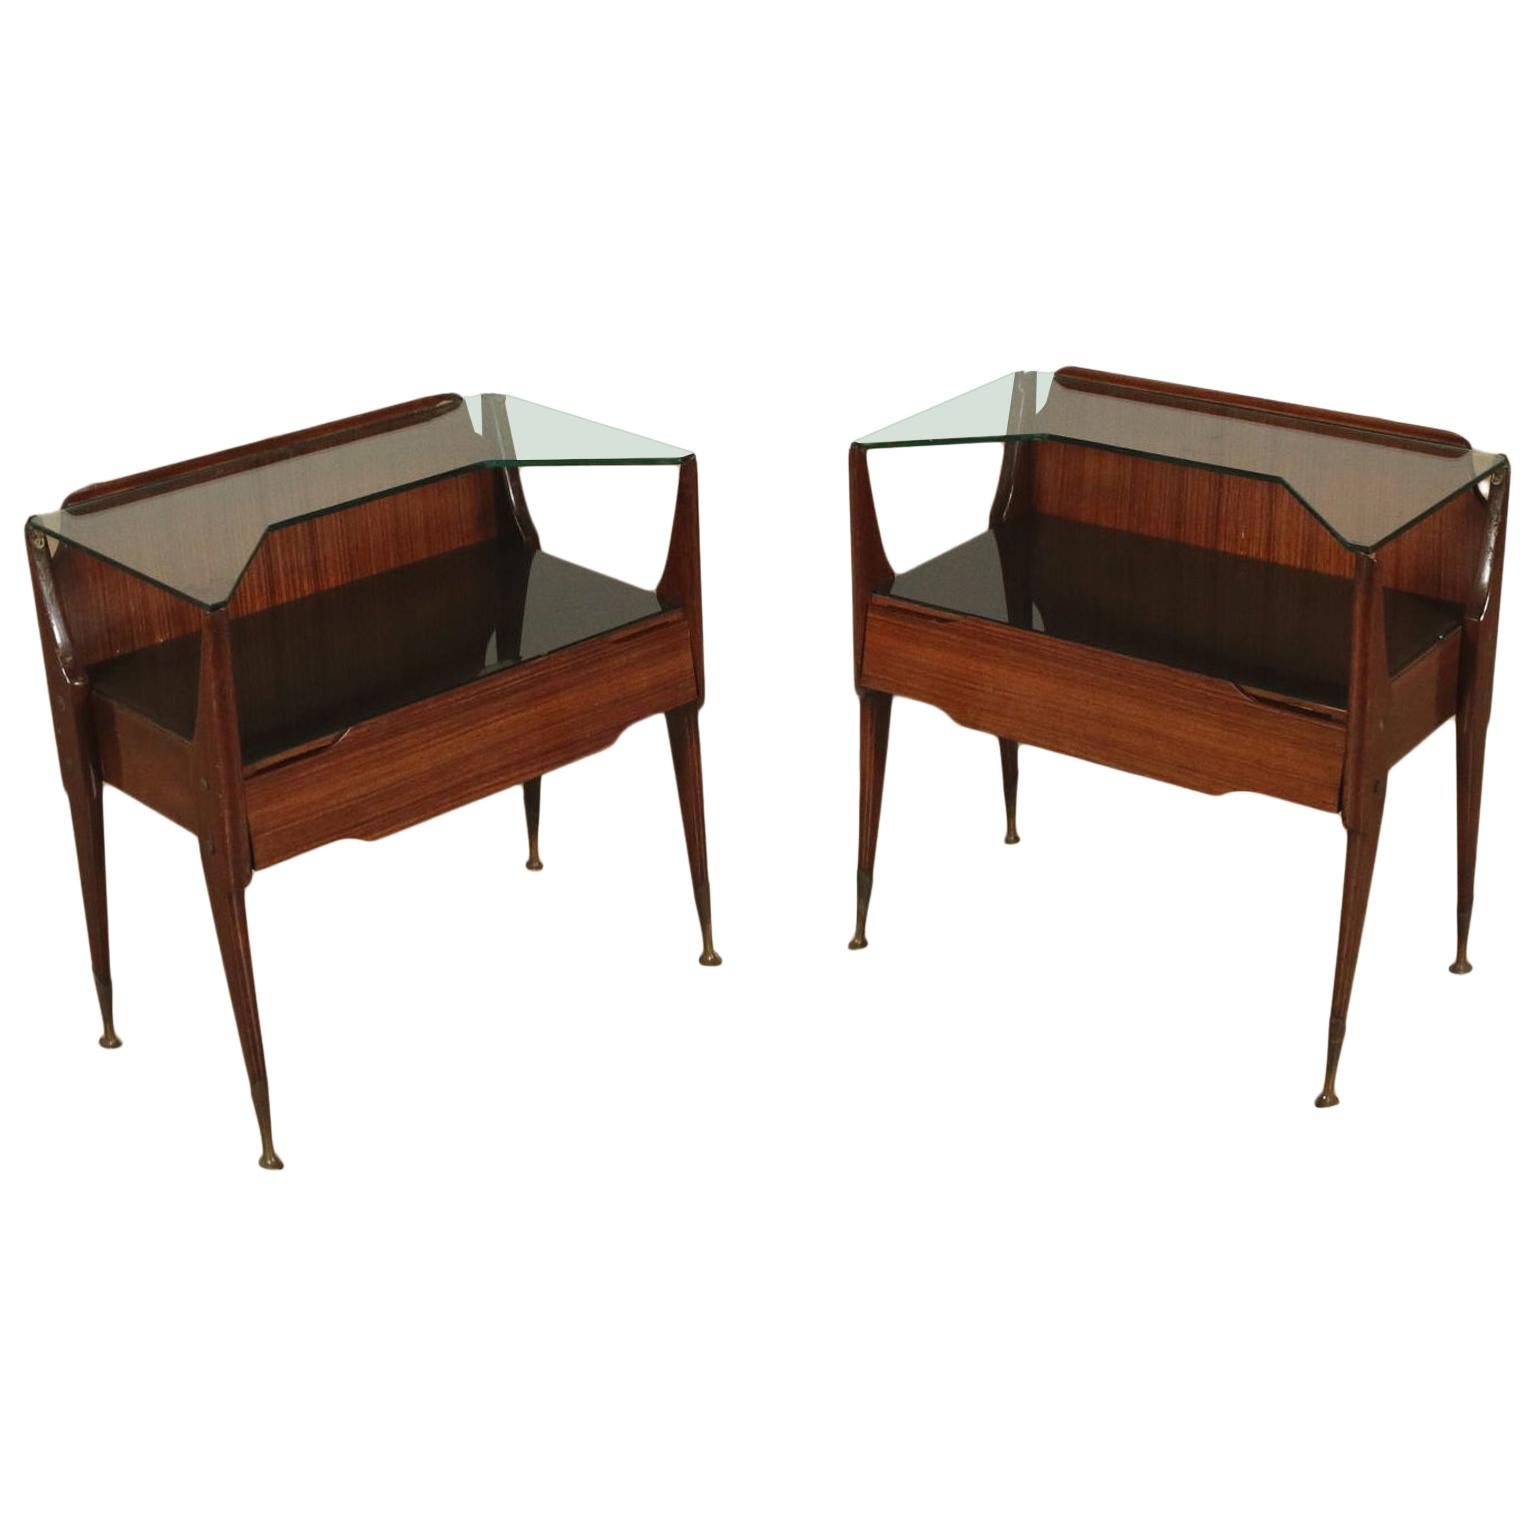 Bedside Tables, wood, Back-Treated Glass Brass, Italy, 1950s-1960s